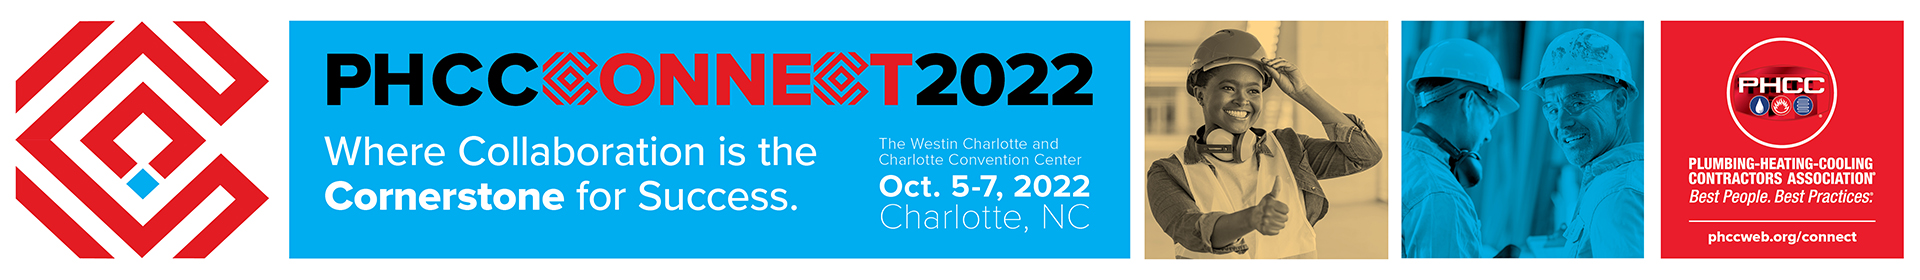 PHCCCONNECT2022 Event Banner